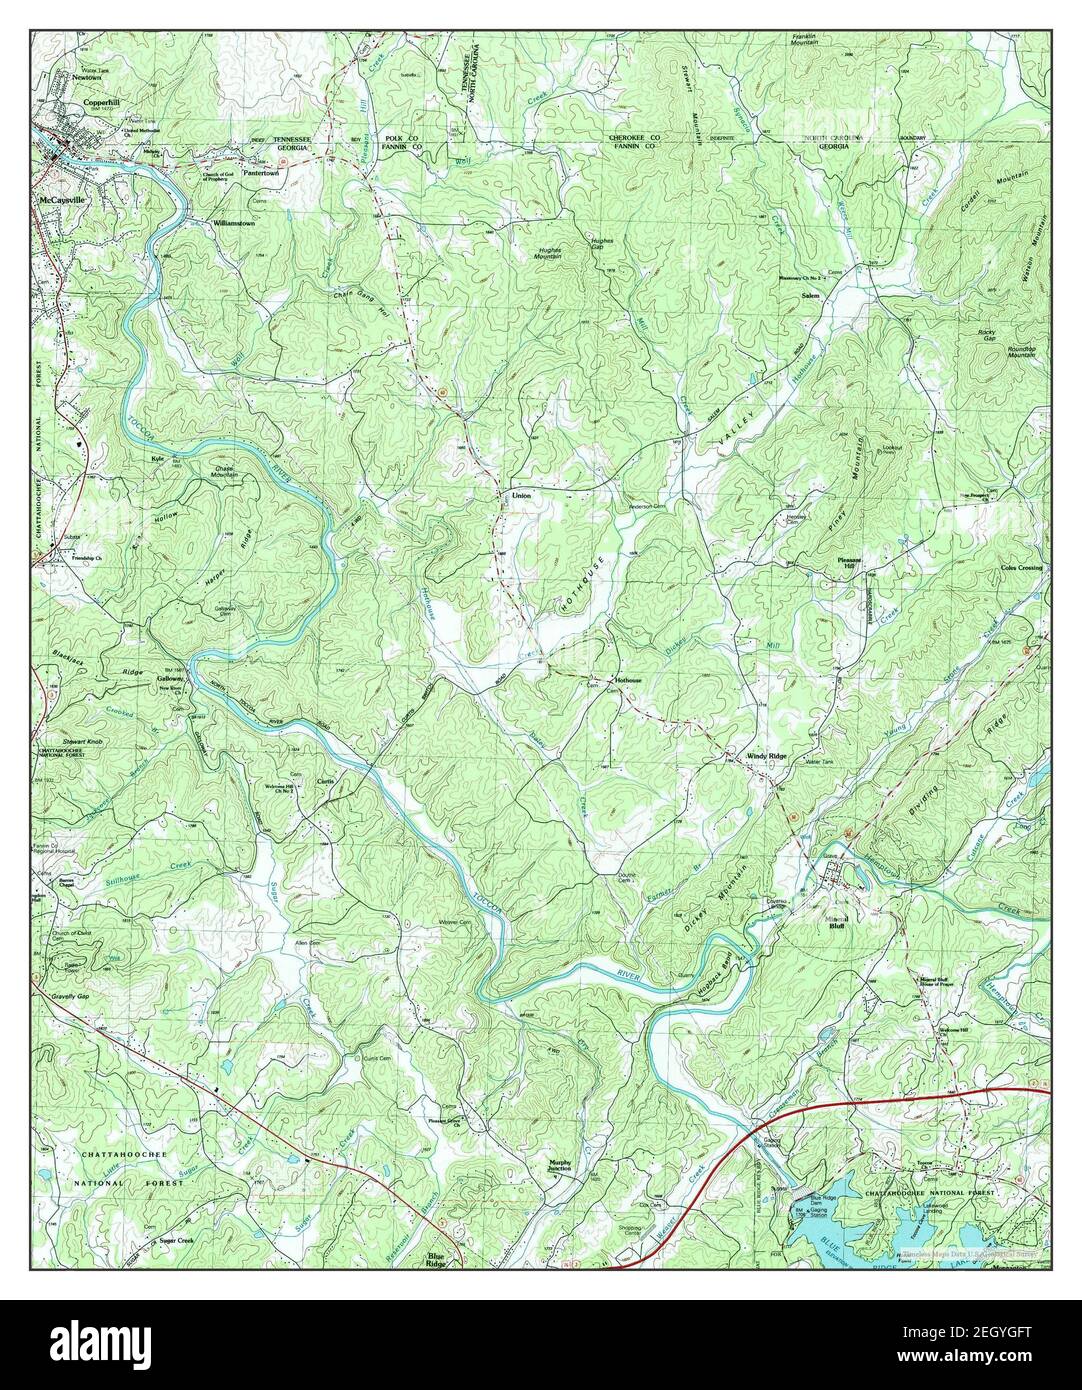 Mineral Bluff, Georgia, map 1999, 1:24000, United States of America by Timeless Maps, data U.S. Geological Survey Foto Stock